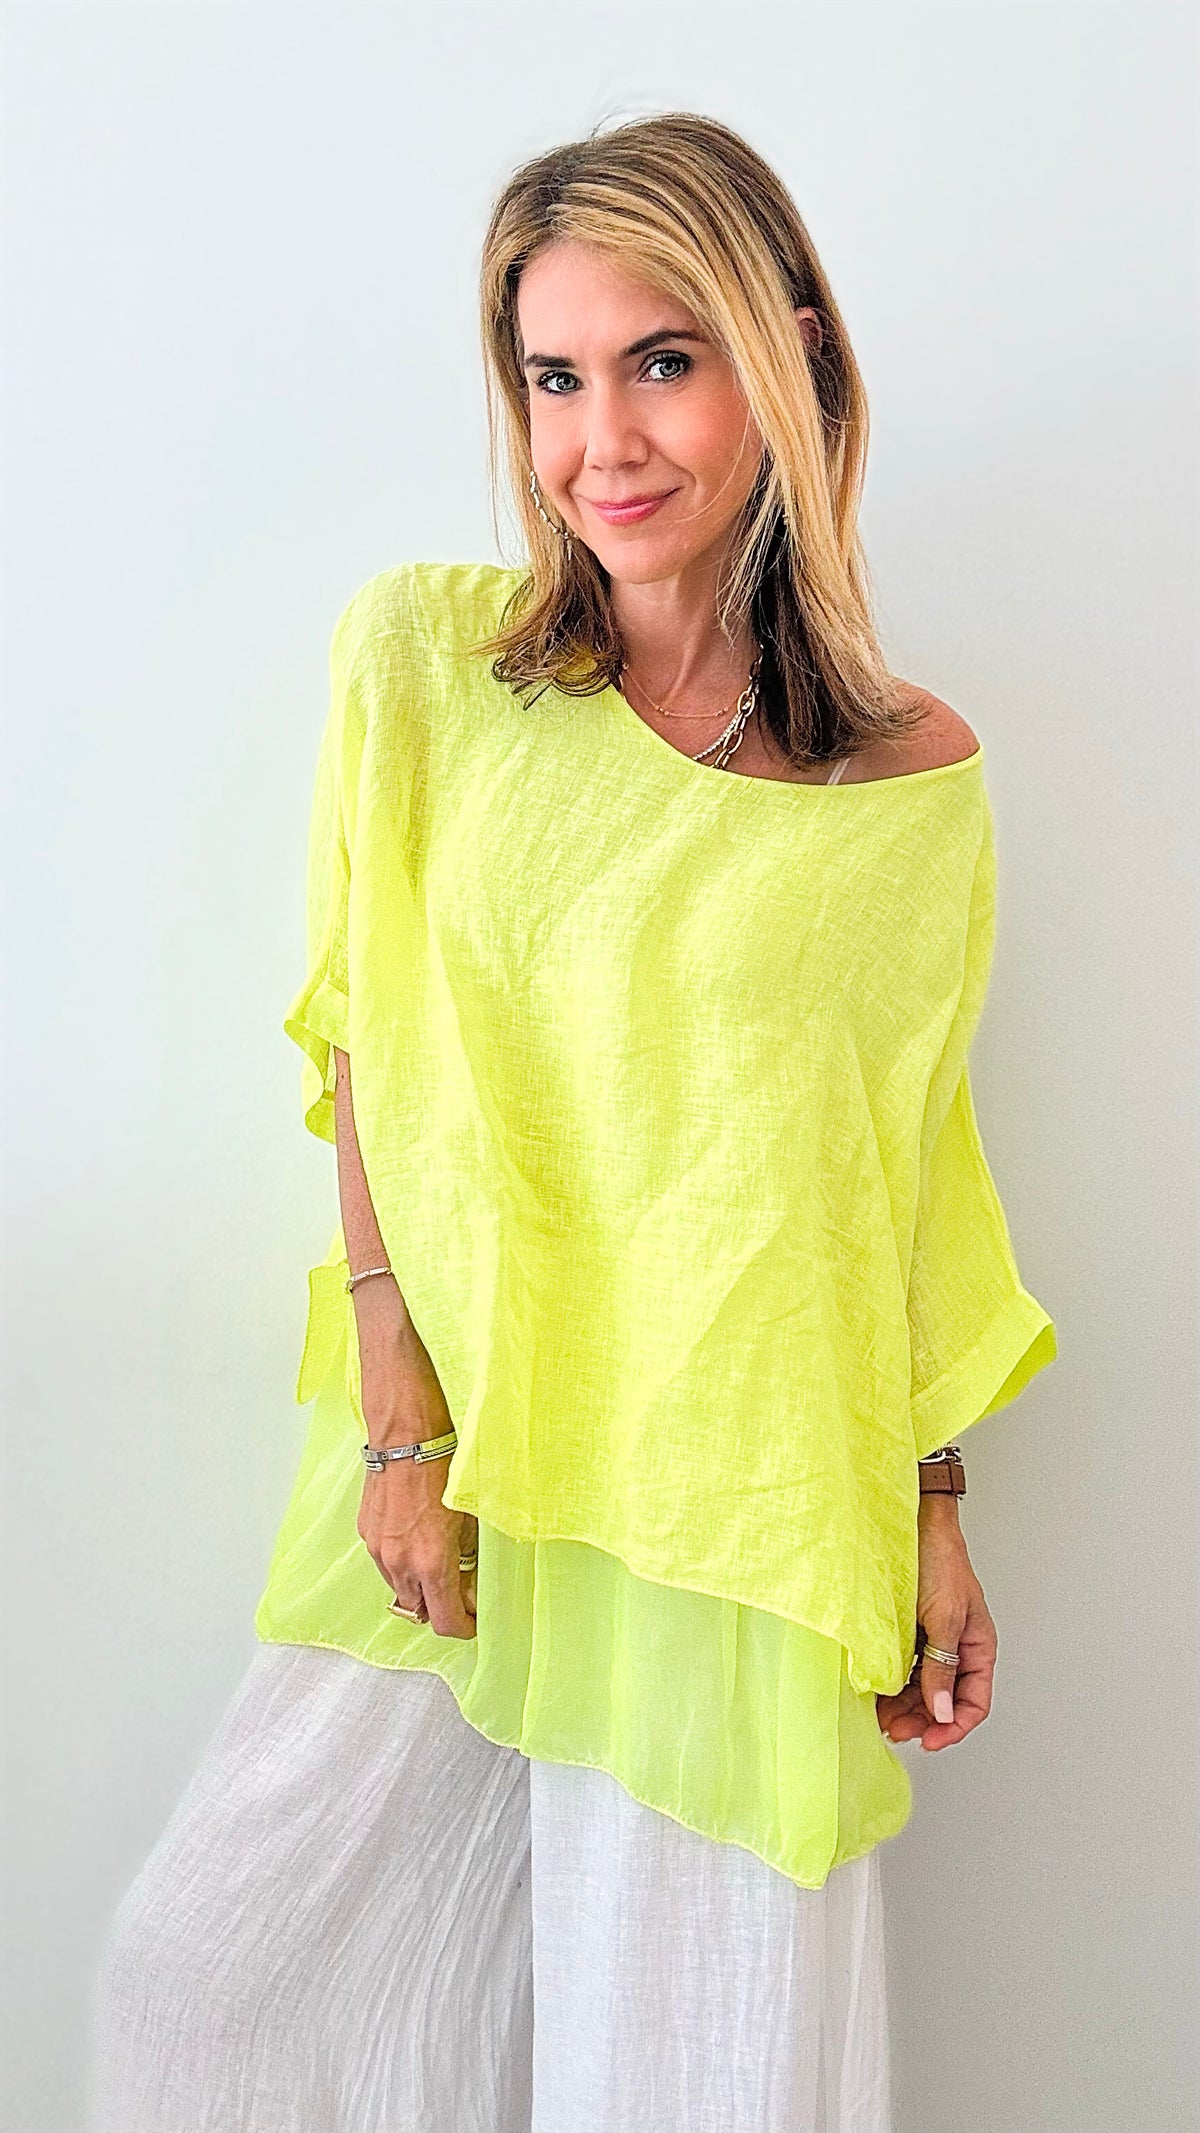 Linen Ruffle Italian Top - Neon Yellow-110 Short Sleeve Tops-Italianissimo-Coastal Bloom Boutique, find the trendiest versions of the popular styles and looks Located in Indialantic, FL